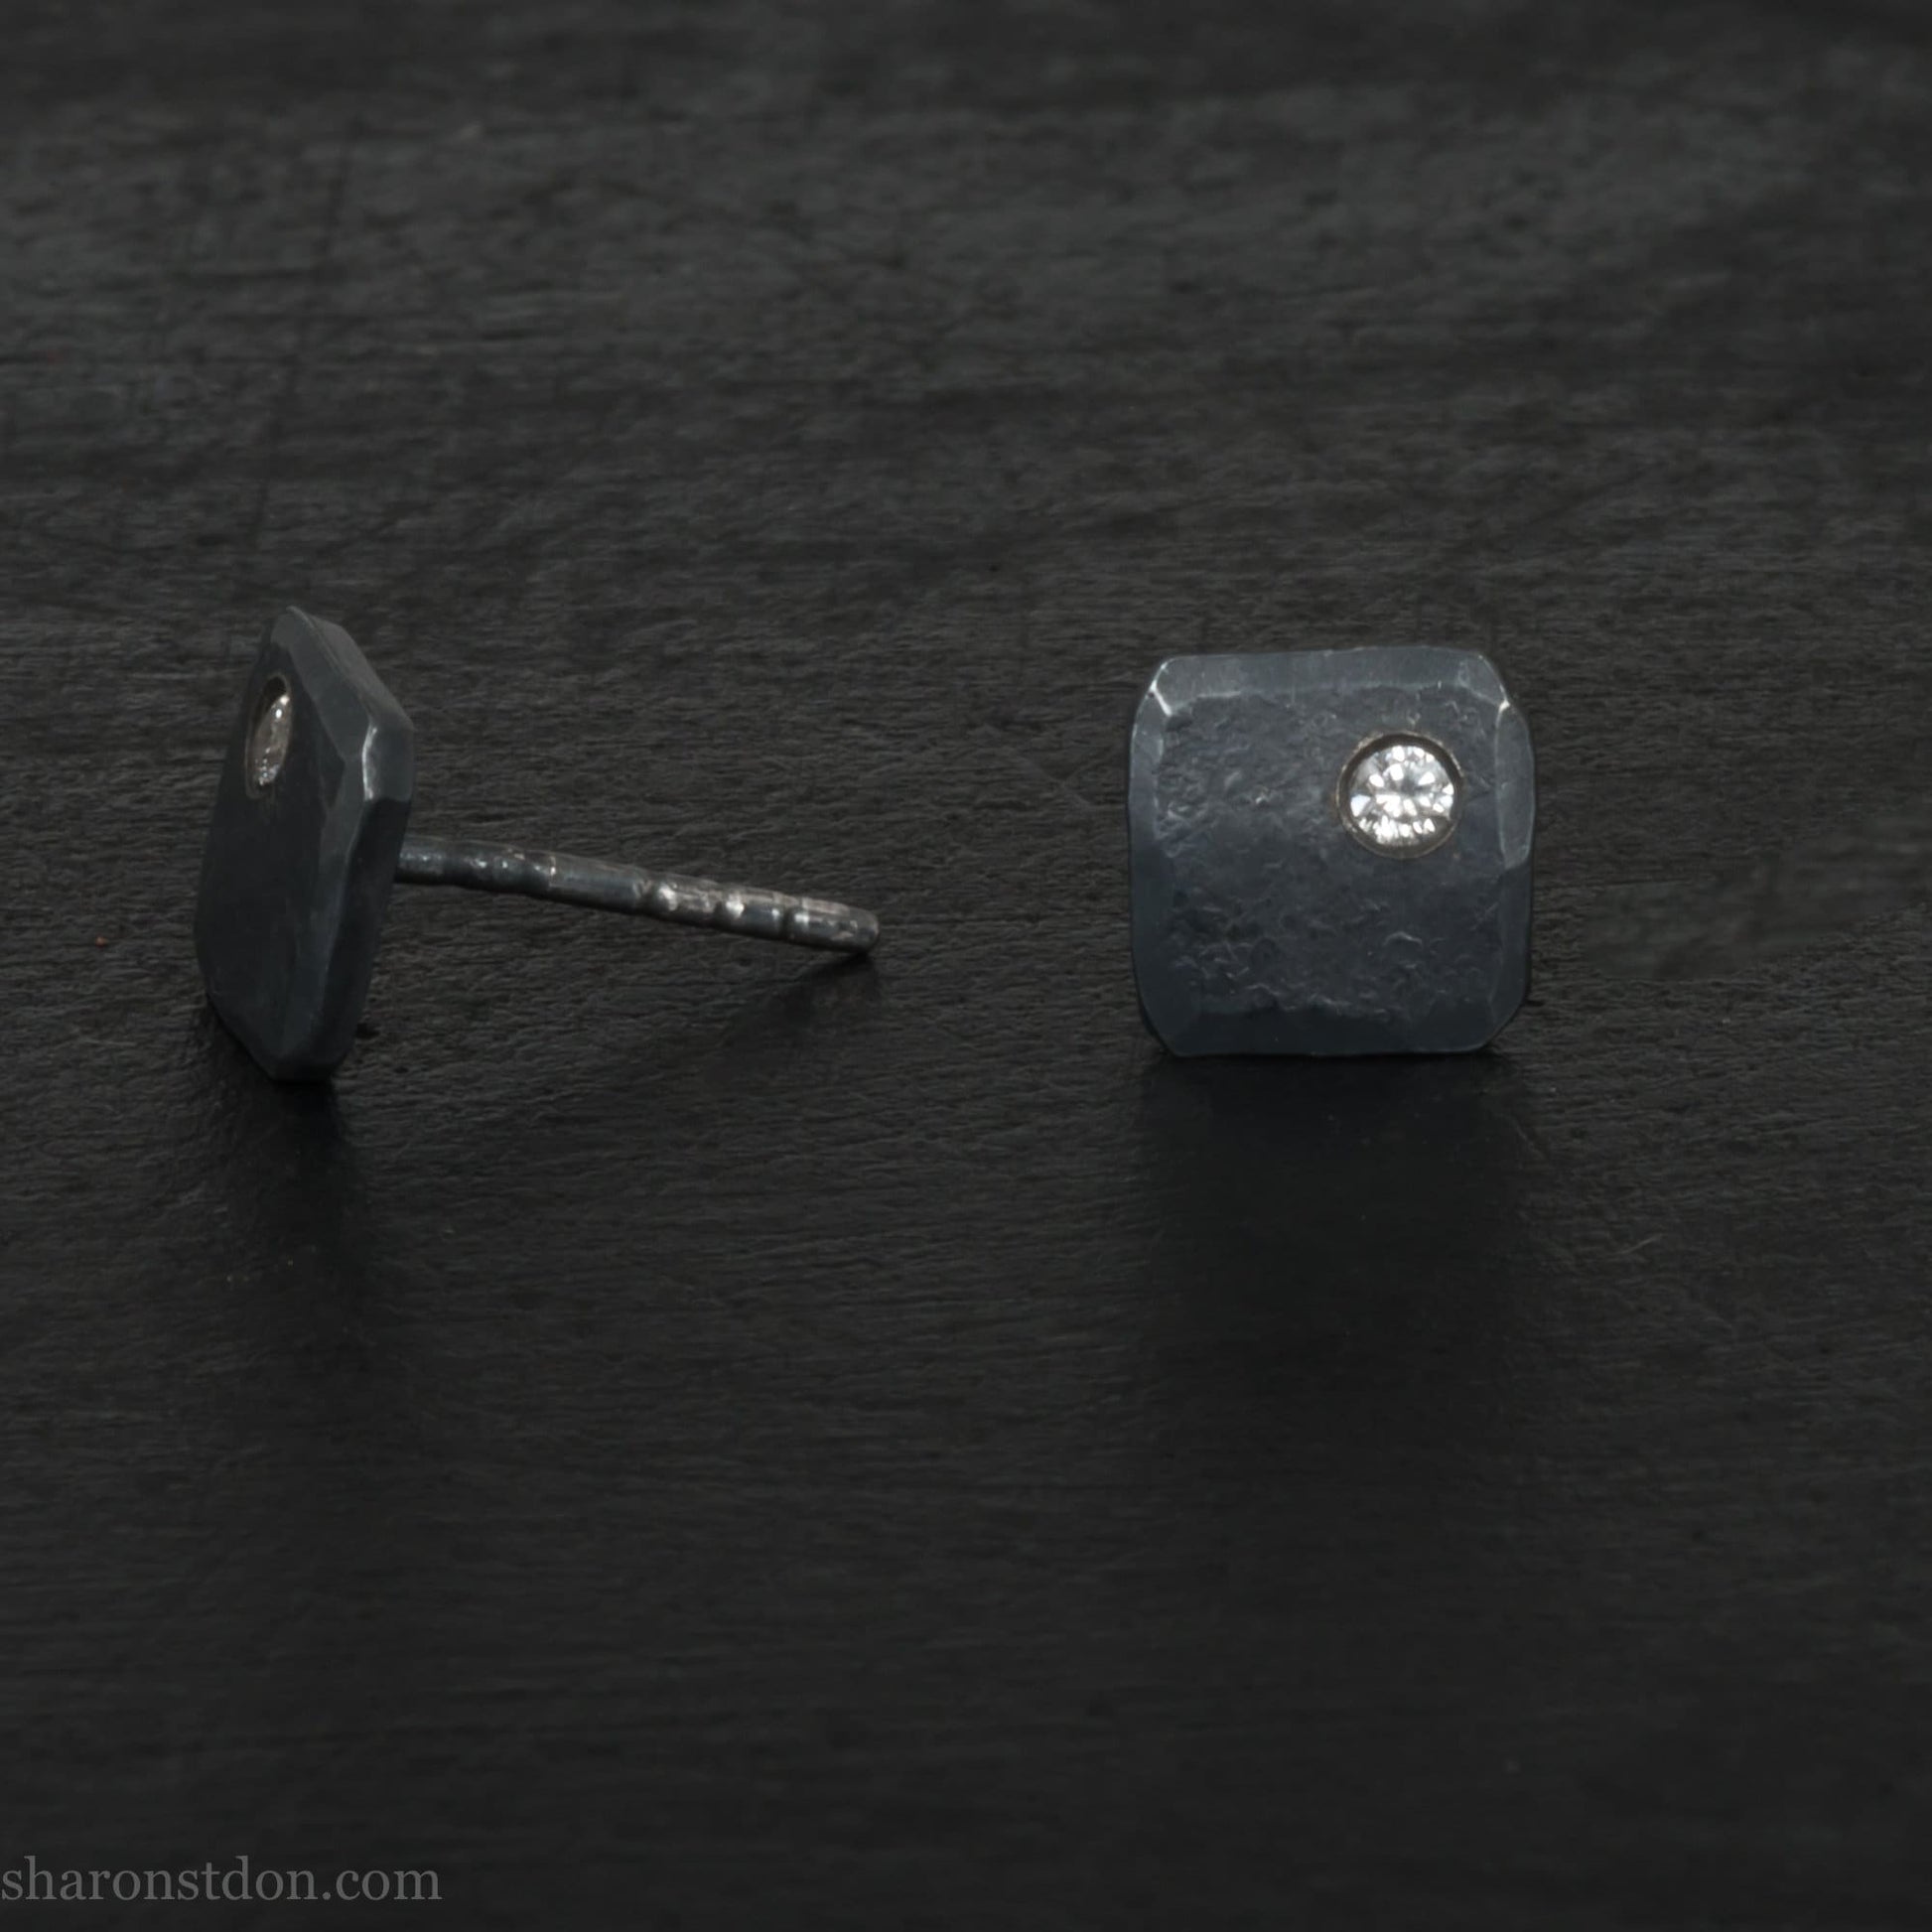 Handmade 925 sterling silver stud earrings with imitation diamond gemstone in the corner. Oxidized black, small square stud earrings made by Sharon SaintDon in North America. 7mm x 7mm x 1.5mm